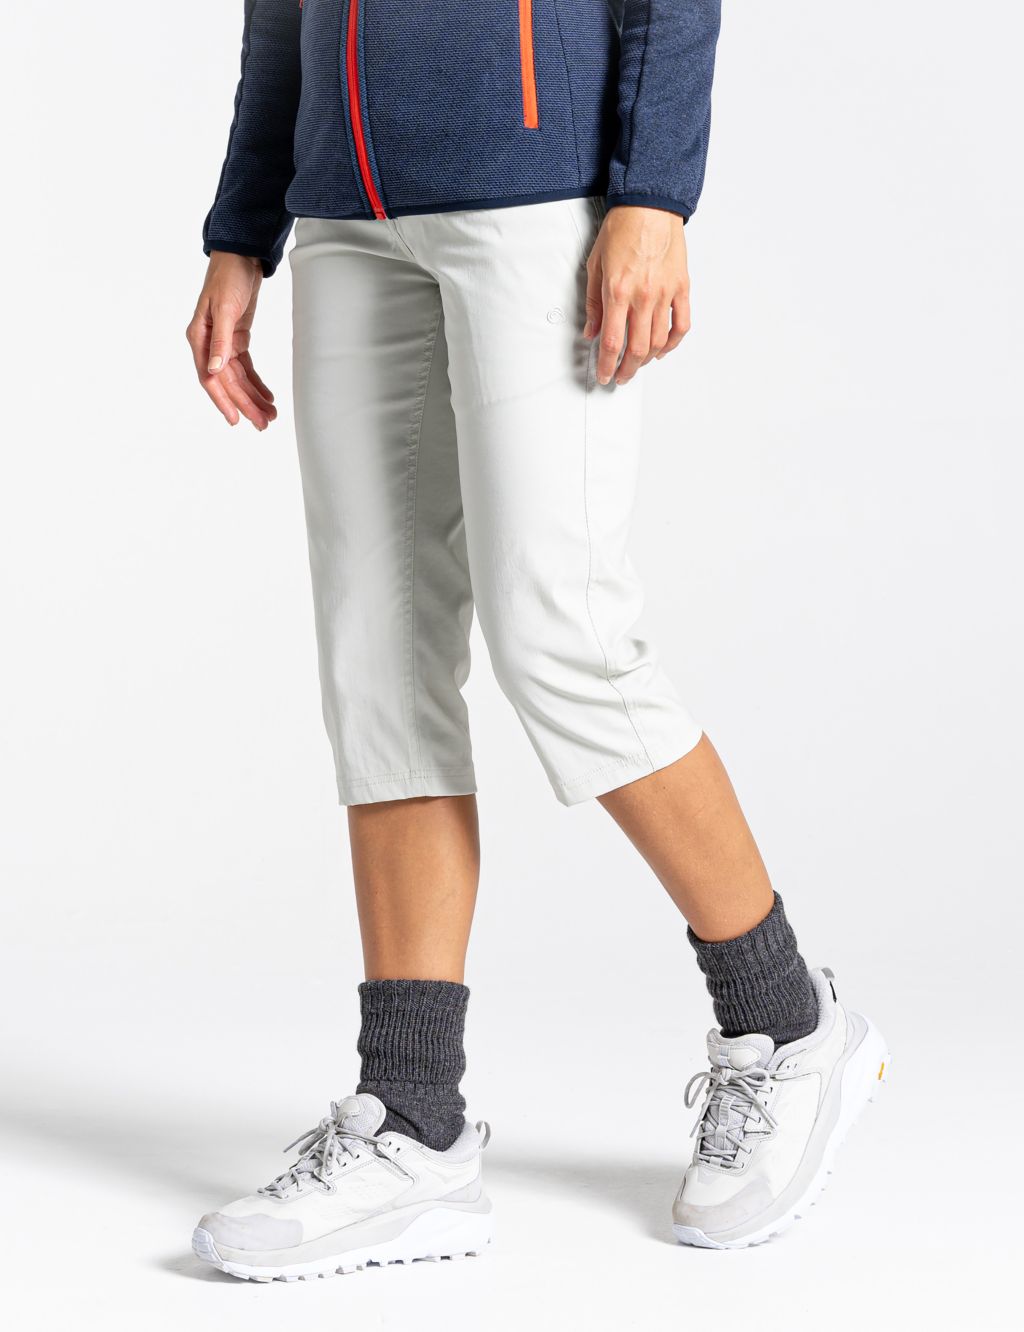 Slim Fit Cropped Trousers image 3